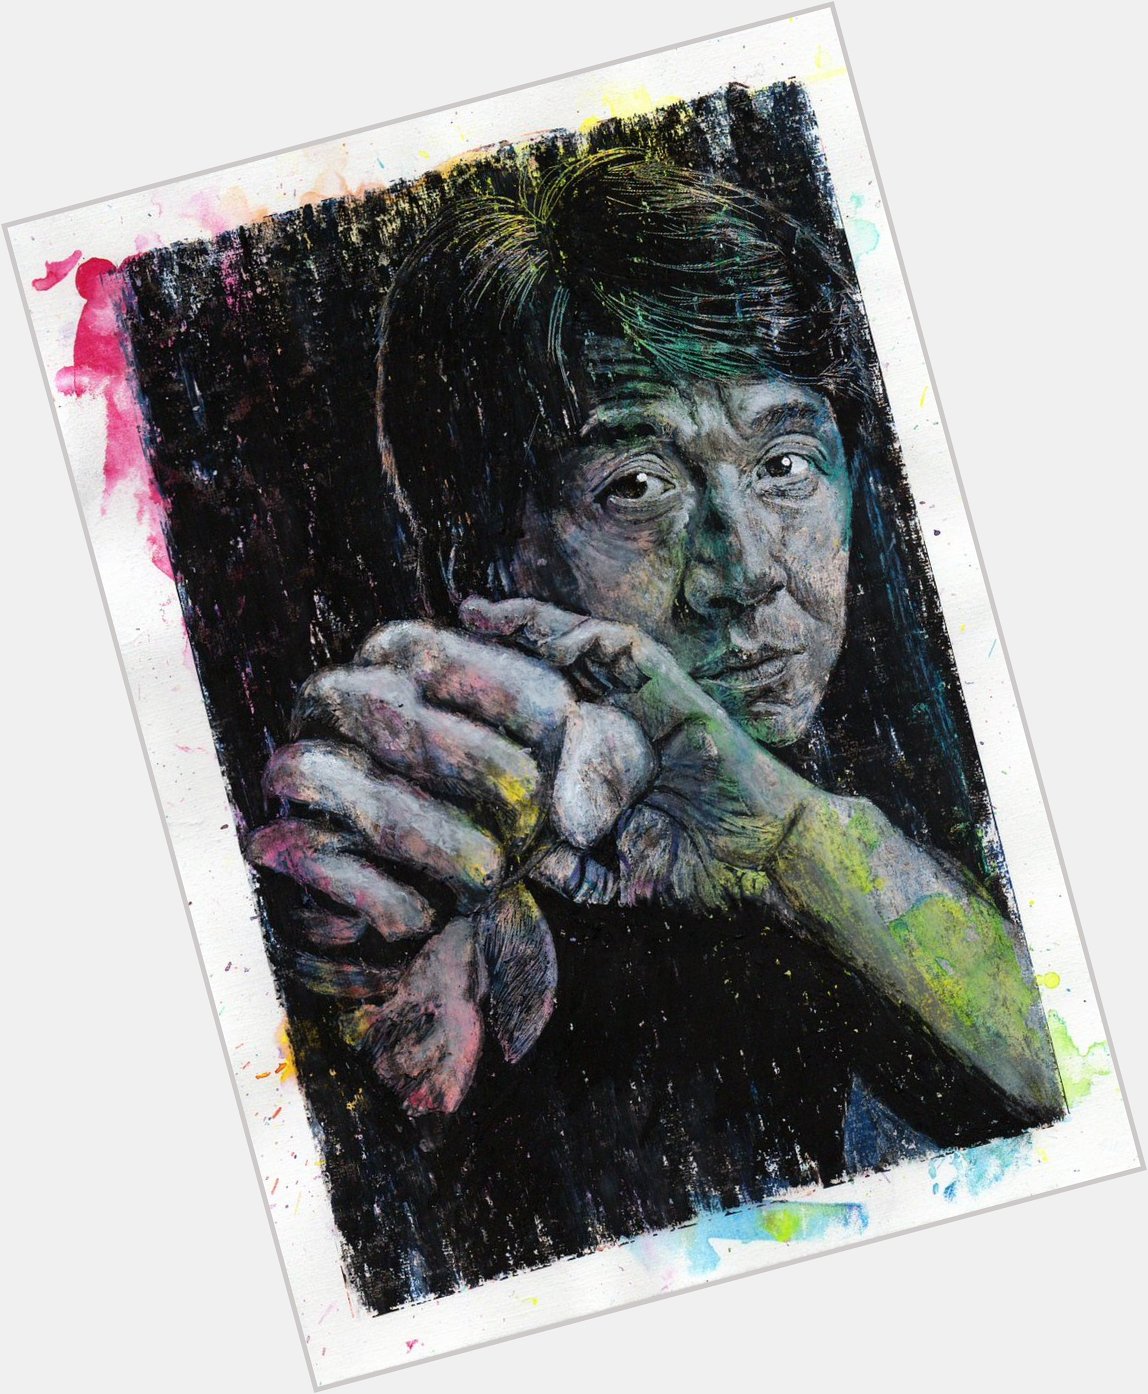 Happy 68th birthday Jackie Chan! This picture: oil and ink on acrylic paper, 21cm x 30cm. 